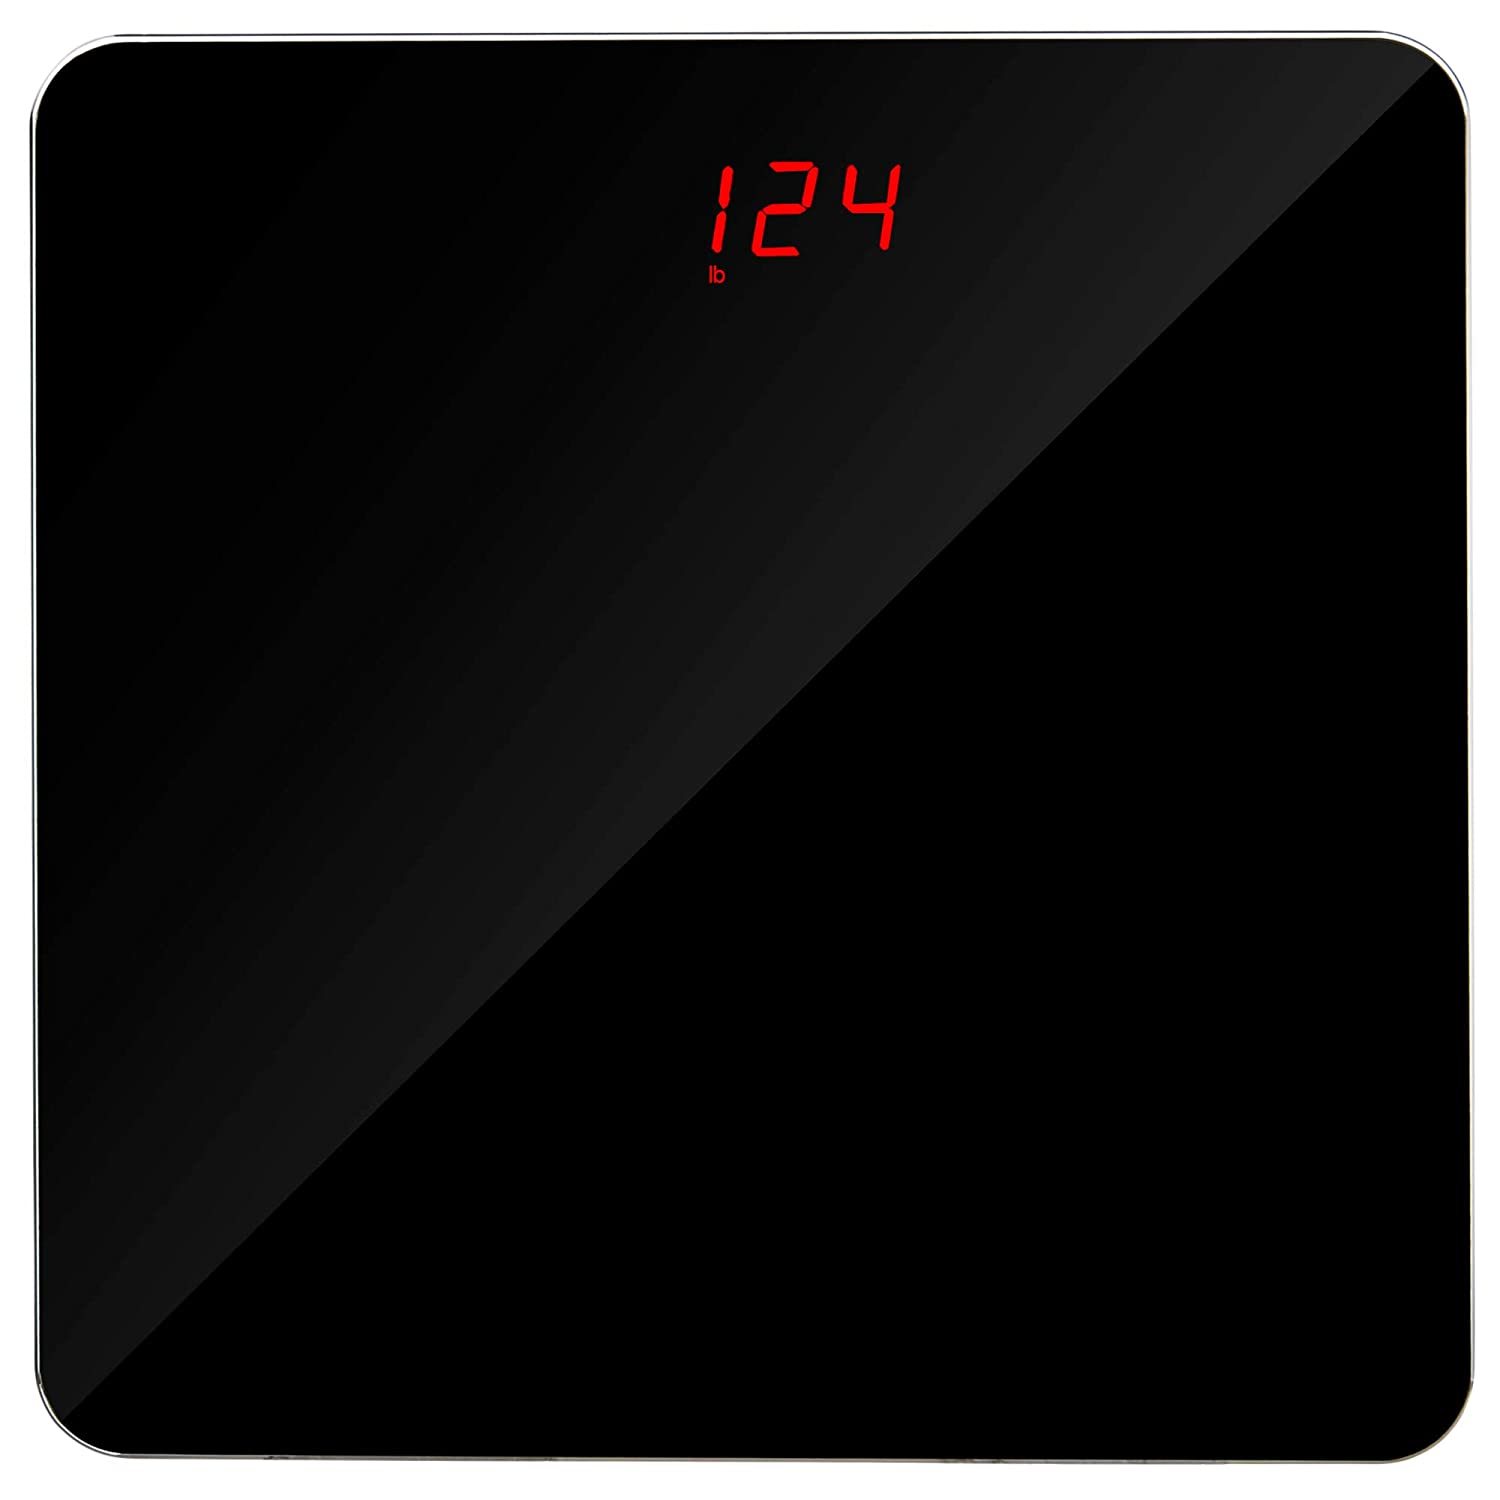 Primary image for Digital Body Weight Bathroom Scale - Sleek Black Tempered Glass, With Batteries